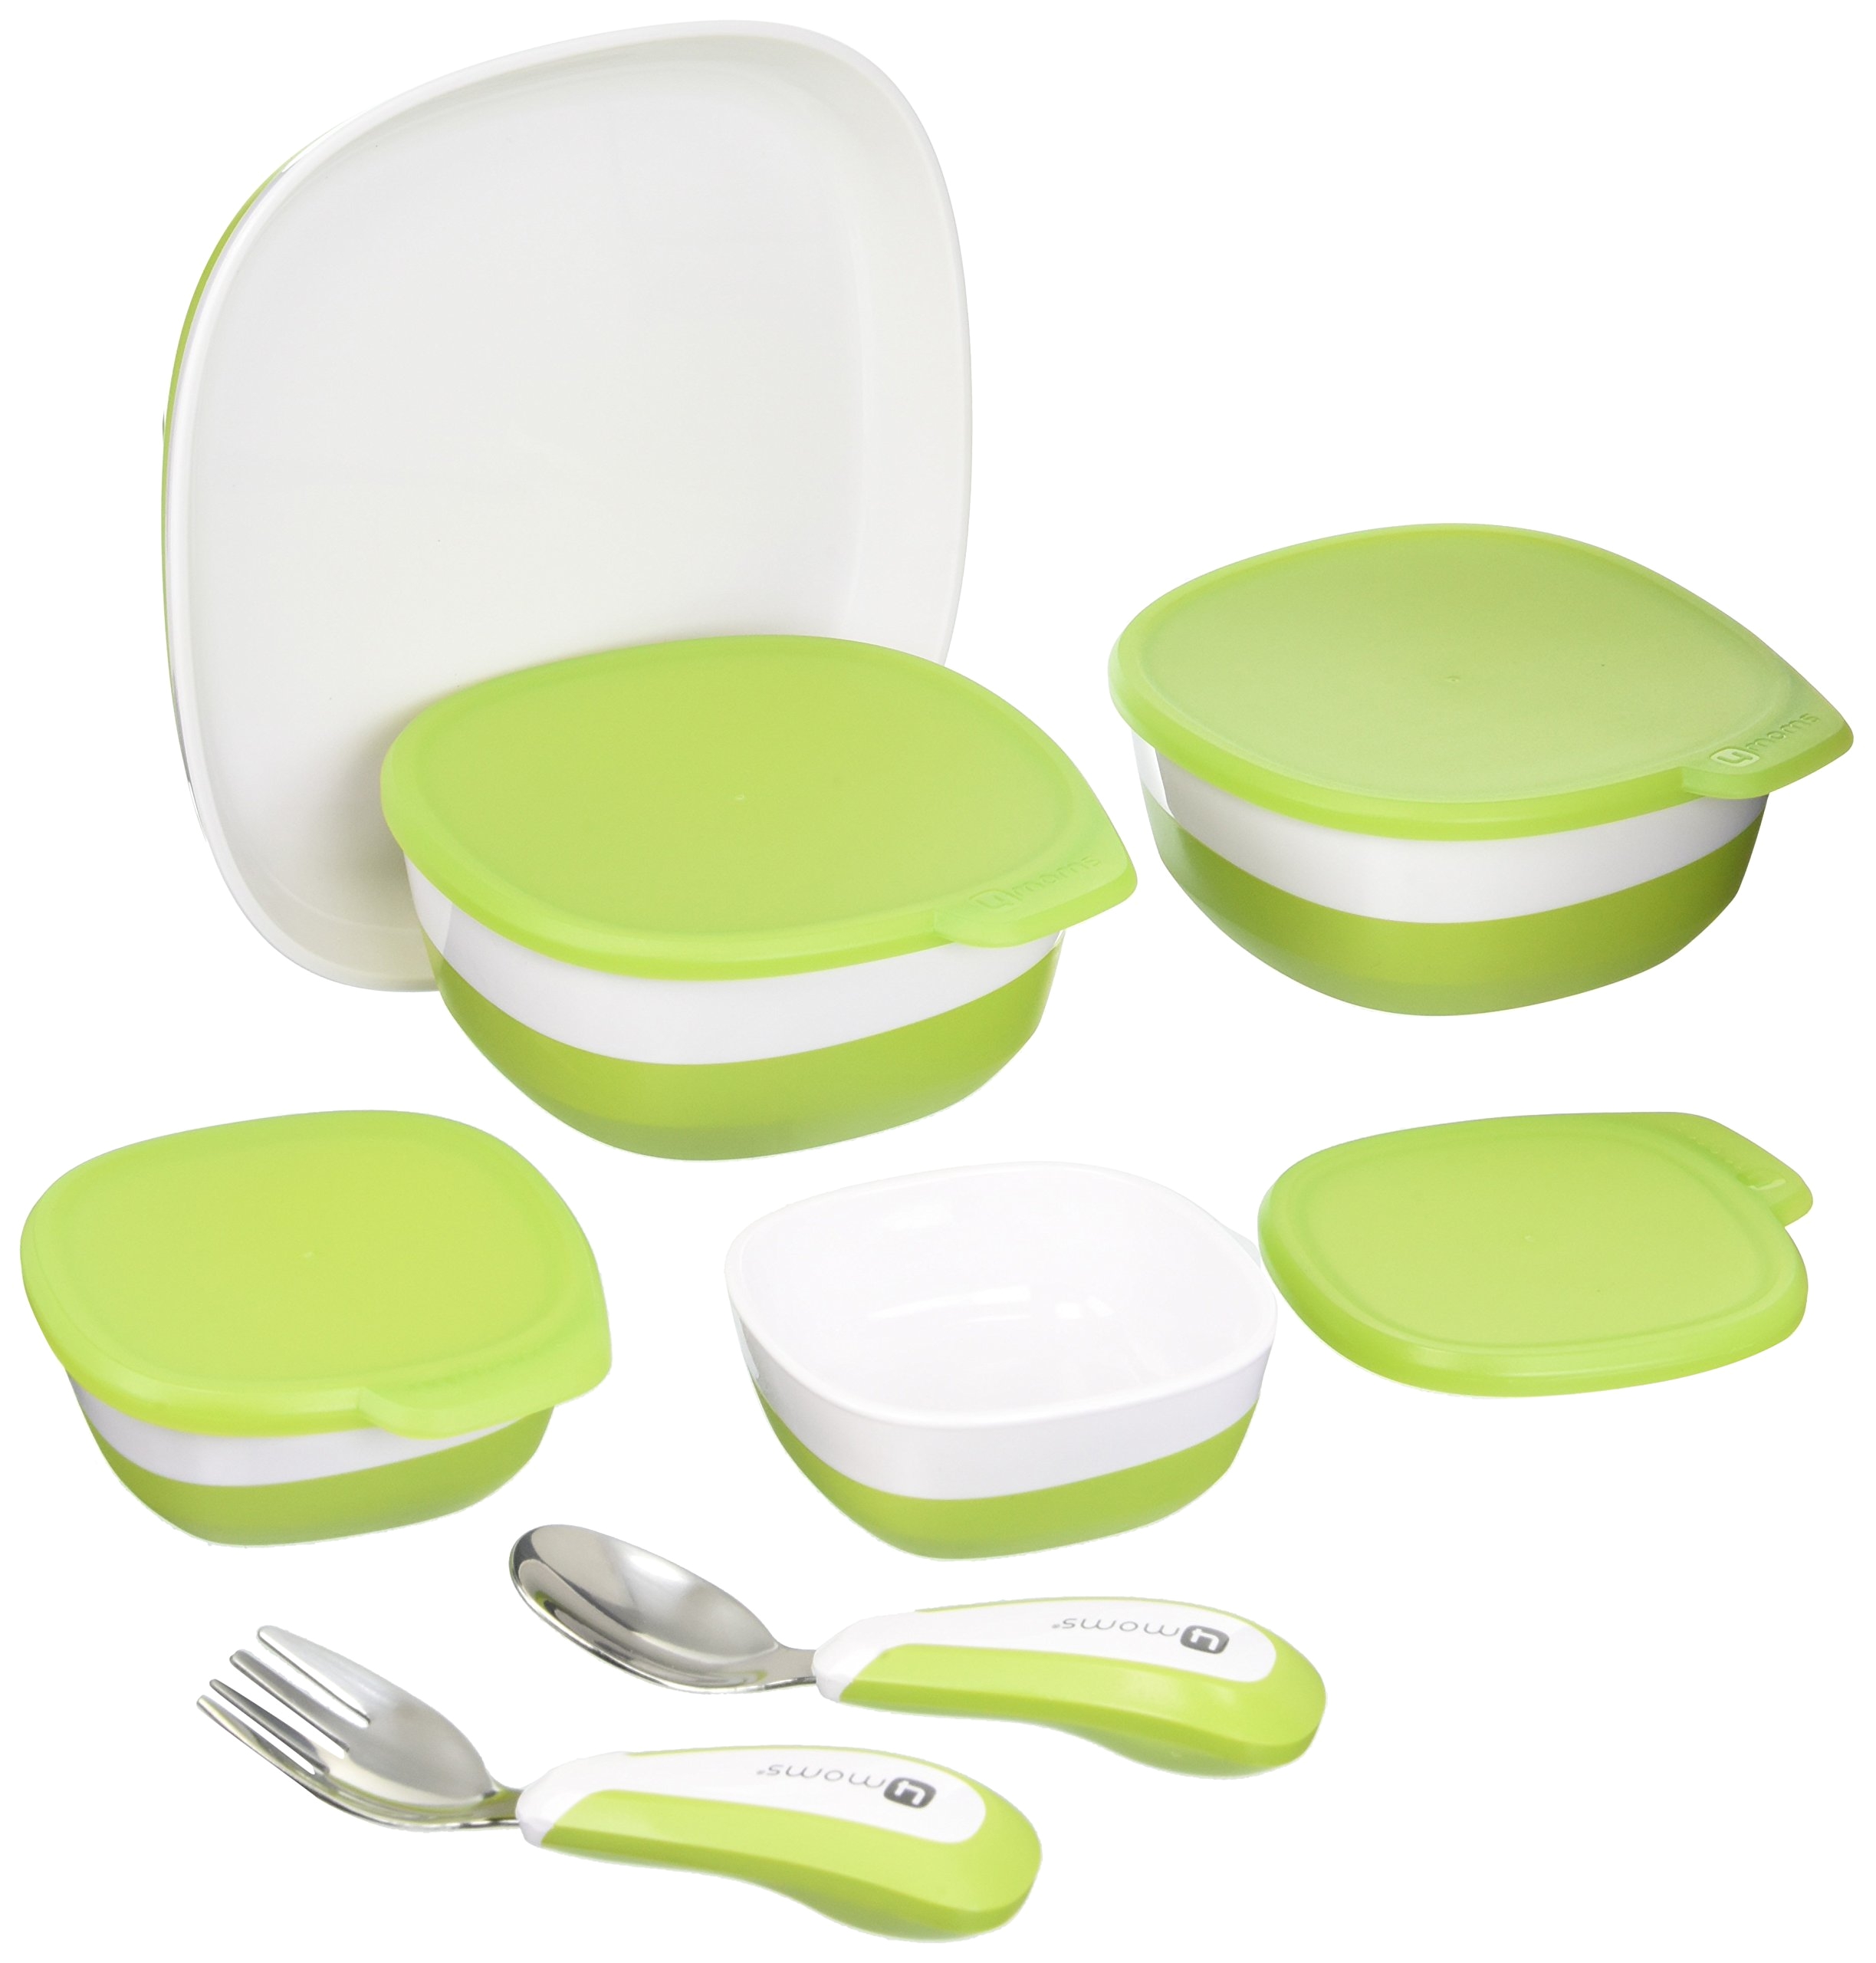 4moms high chair magnetic plate bowls and utensils feeding set dishwasher safe